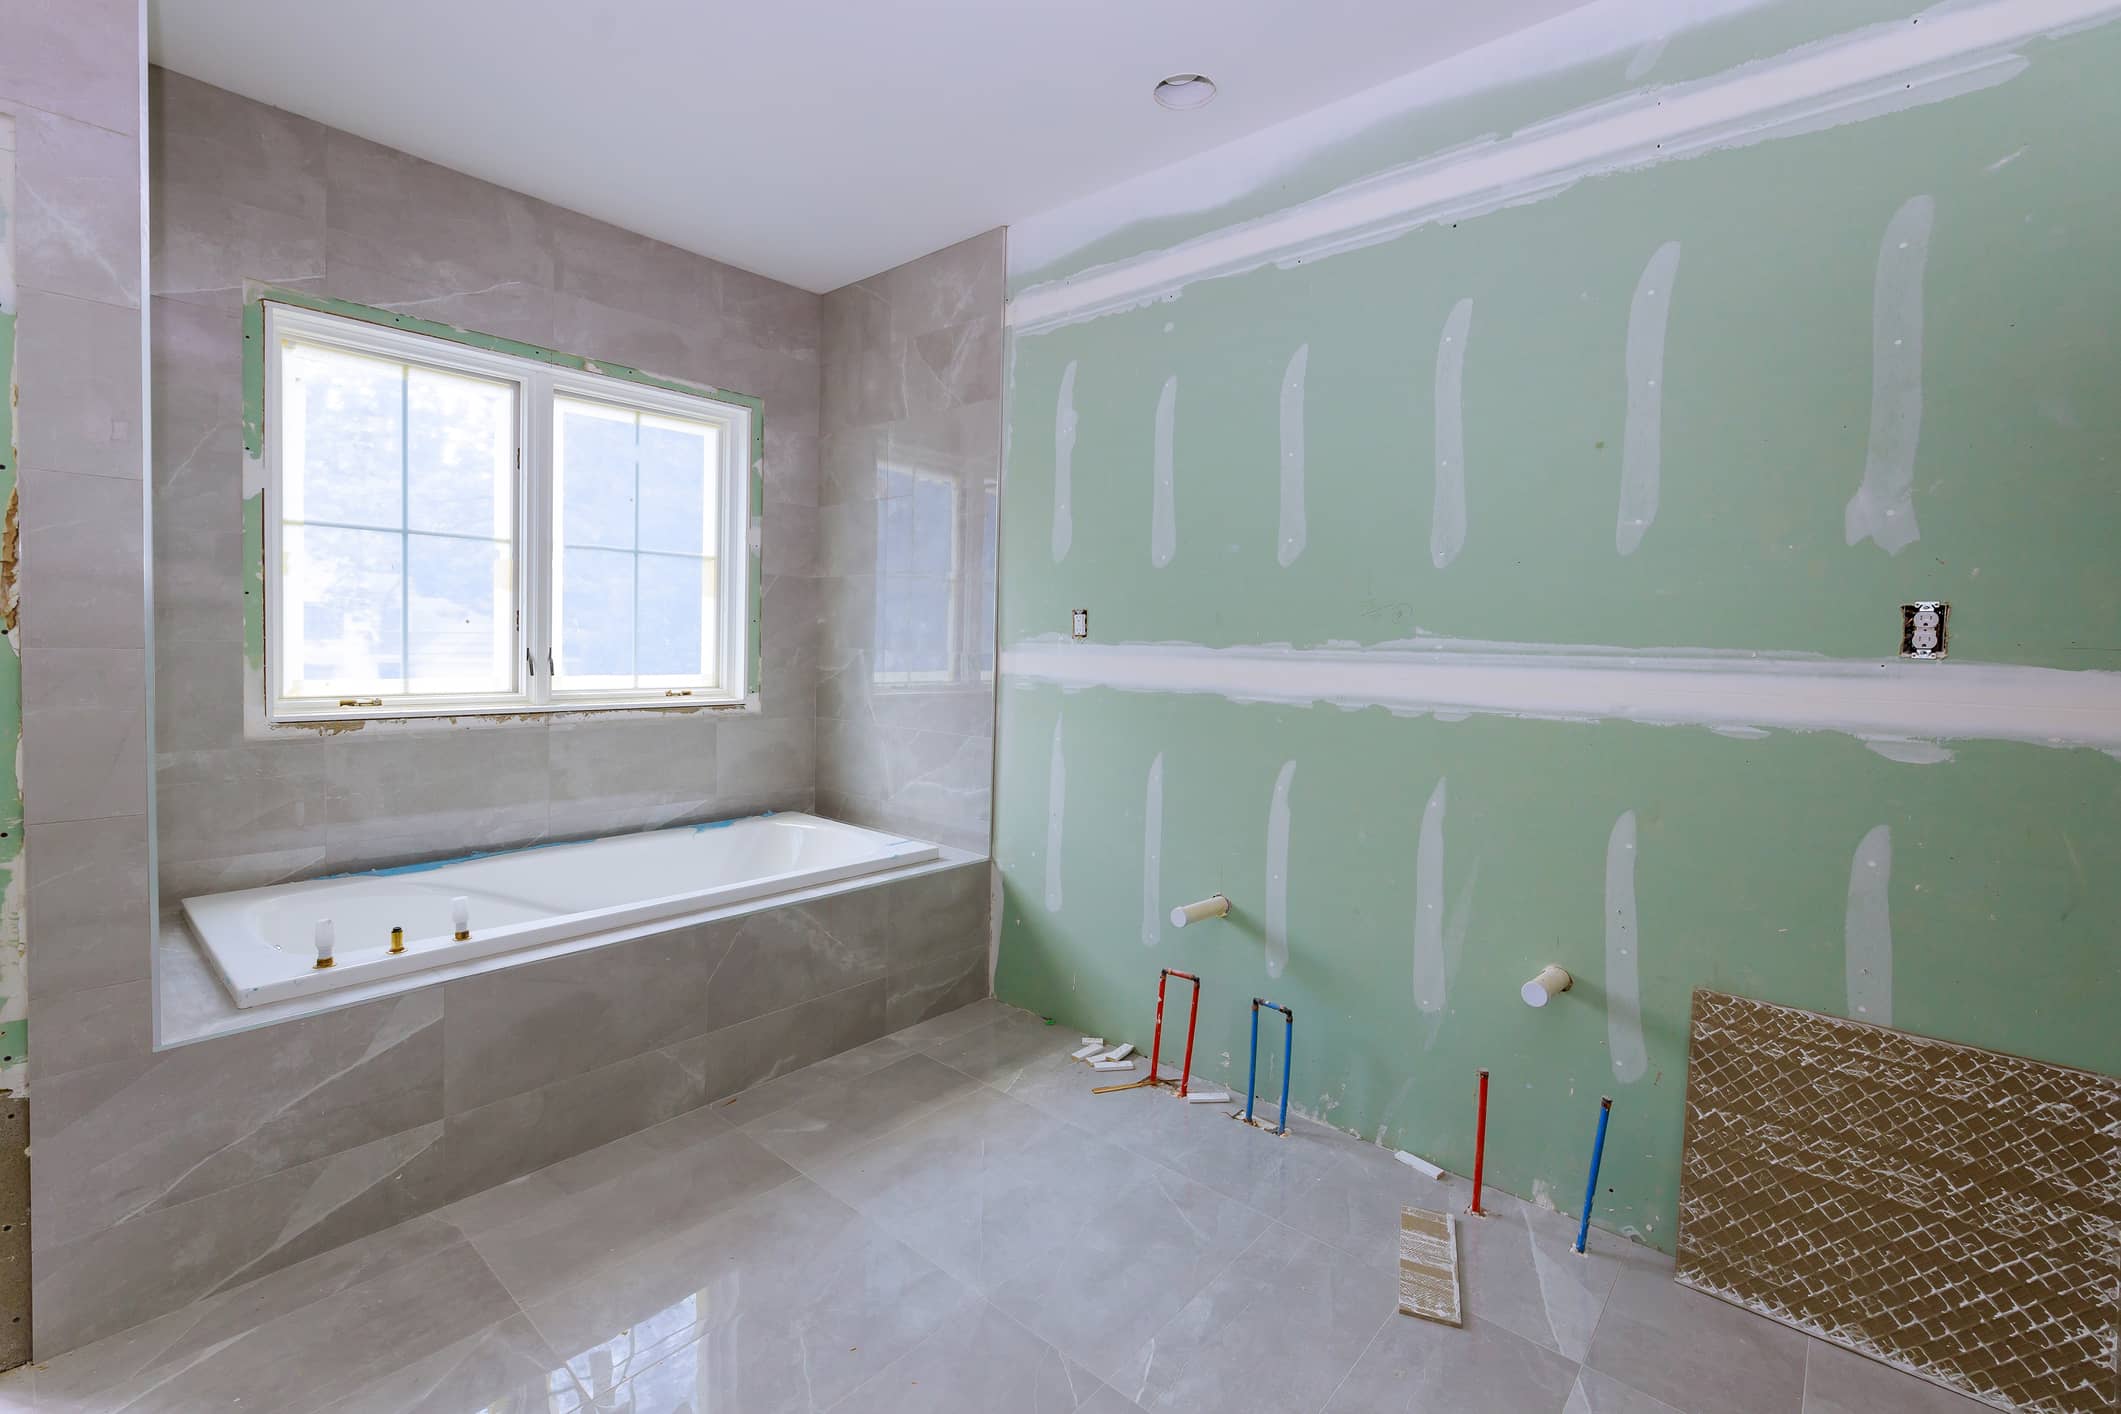 Reimagine Your Bathroom with Stracoa Remodeling - Magnolia's Premier Bathroom Remodeling Specialists